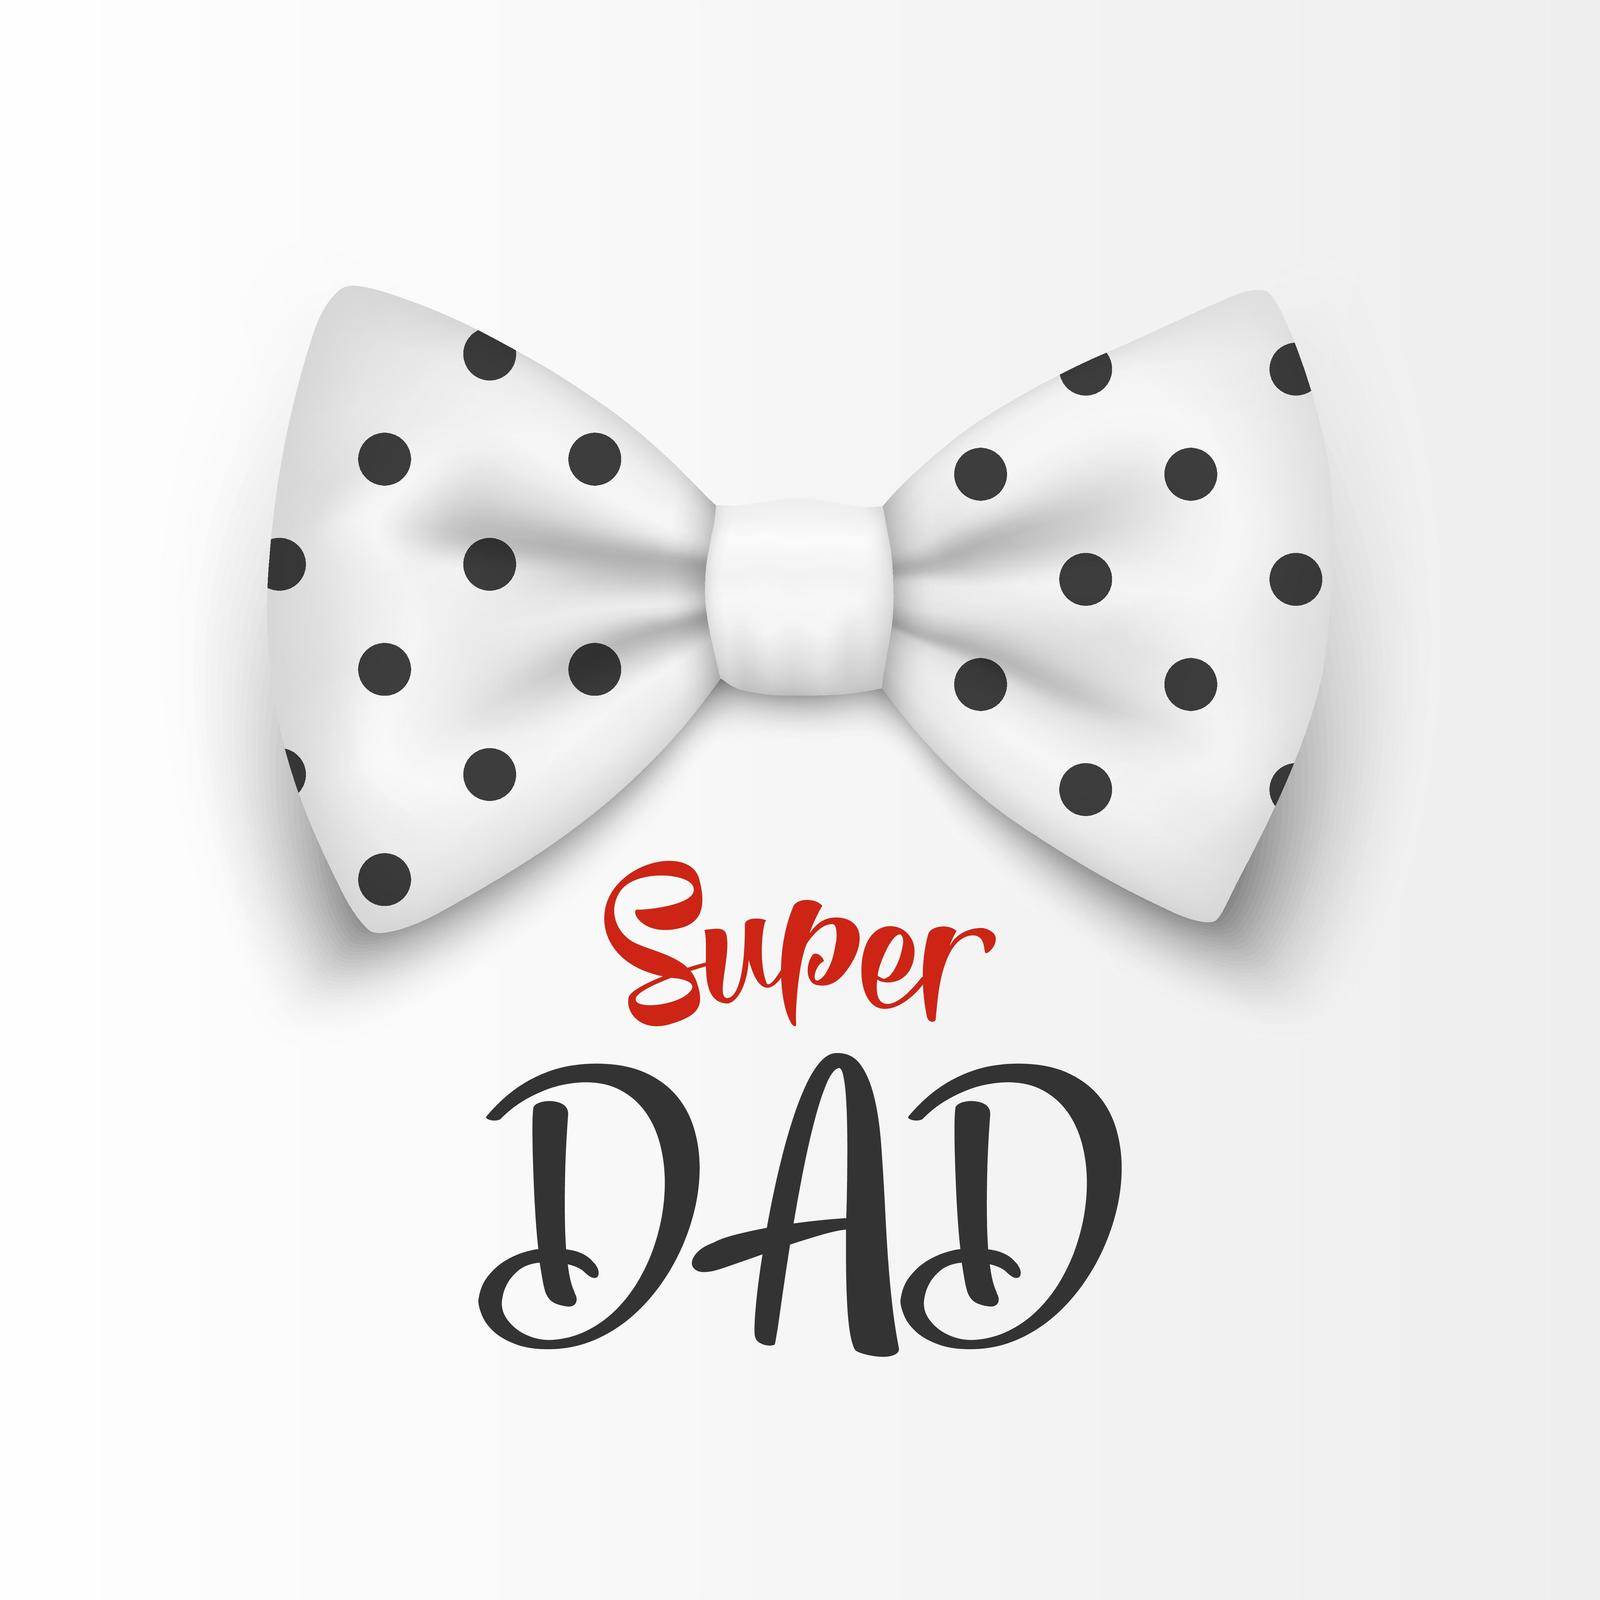 Super Dad. Vector Banner for Father s Day. 3d Realistic Silk White Polka Dot Bow Tie. Glossy Bowtie, Tie Gentleman. Father s Day Holiday Concept. Design Template for Greeting Card, Invitation, Poster.